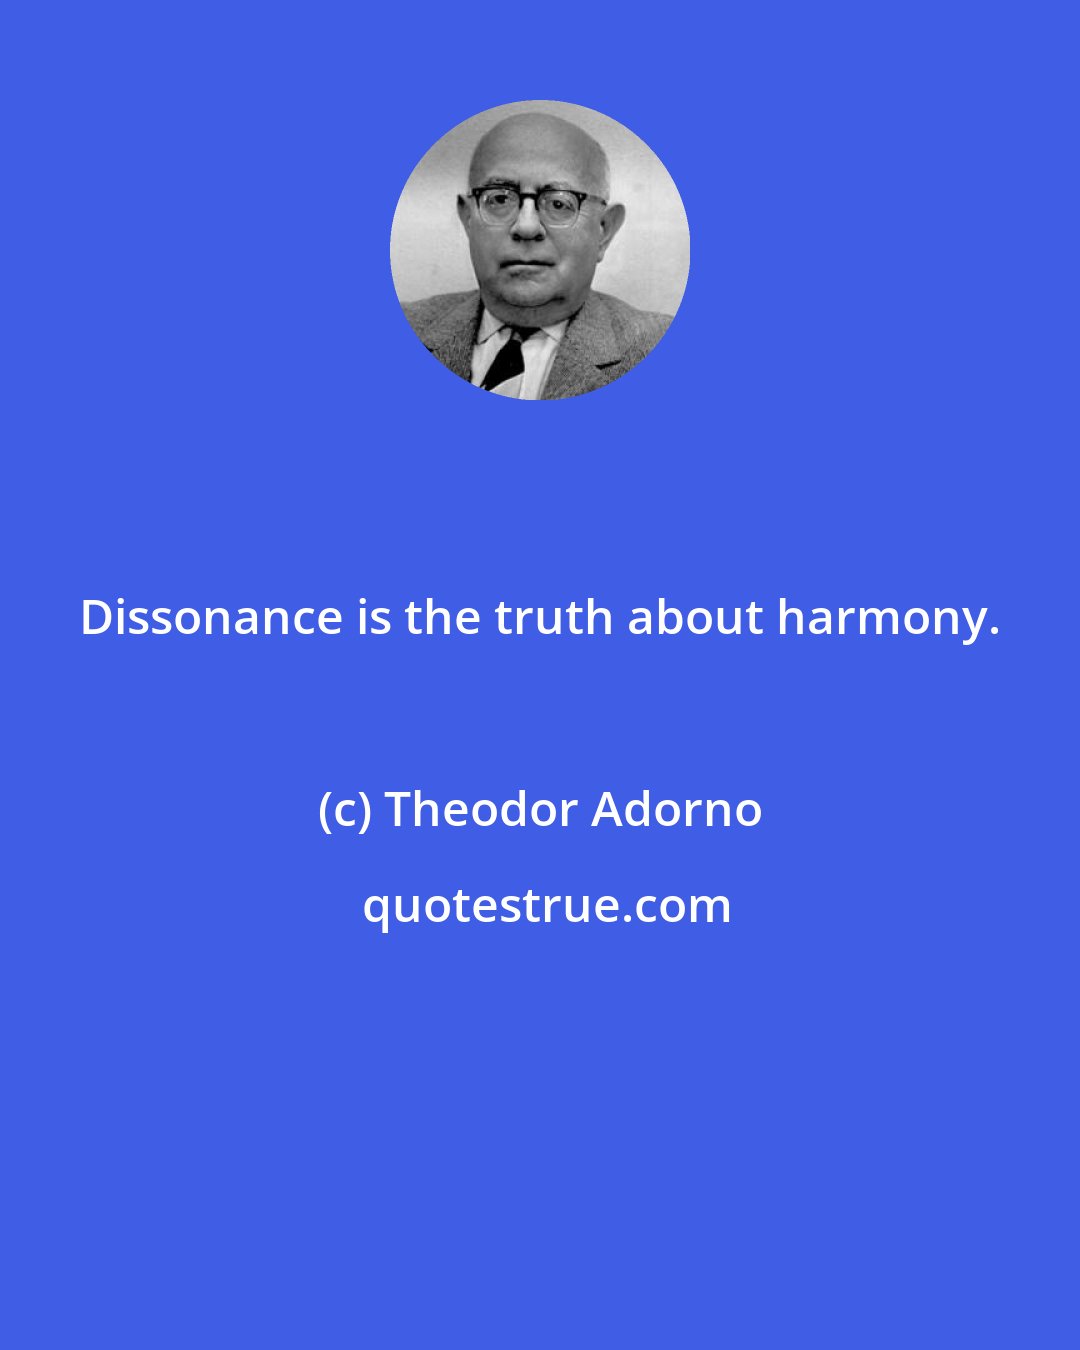 Theodor Adorno: Dissonance is the truth about harmony.